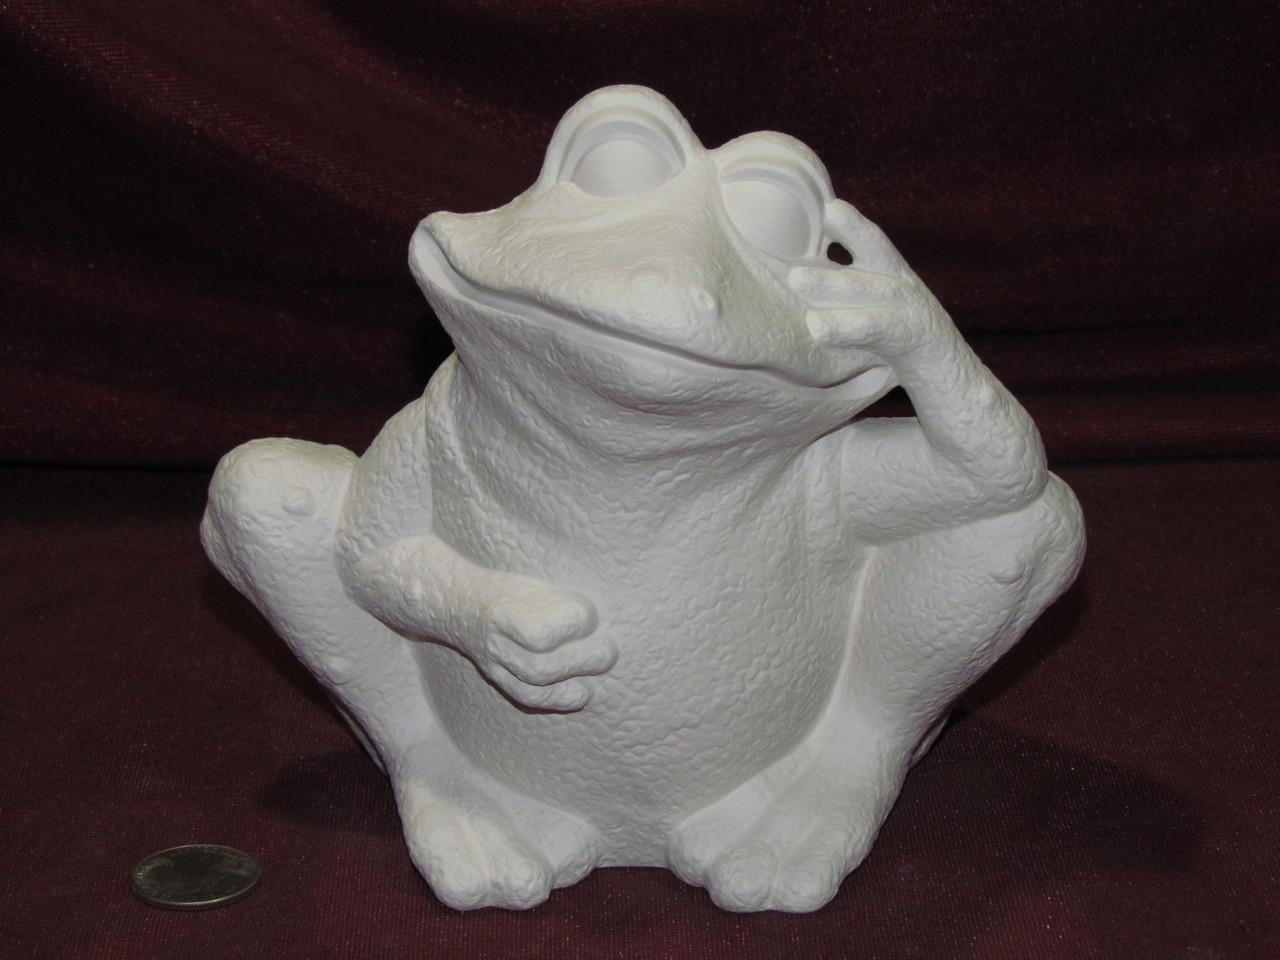 Ceramic Bisque U-Paint Small Frog Scrubby Holder, Soap Dish or Catch All  Ready to Paint Unpainted - Fat Cat Ceramics